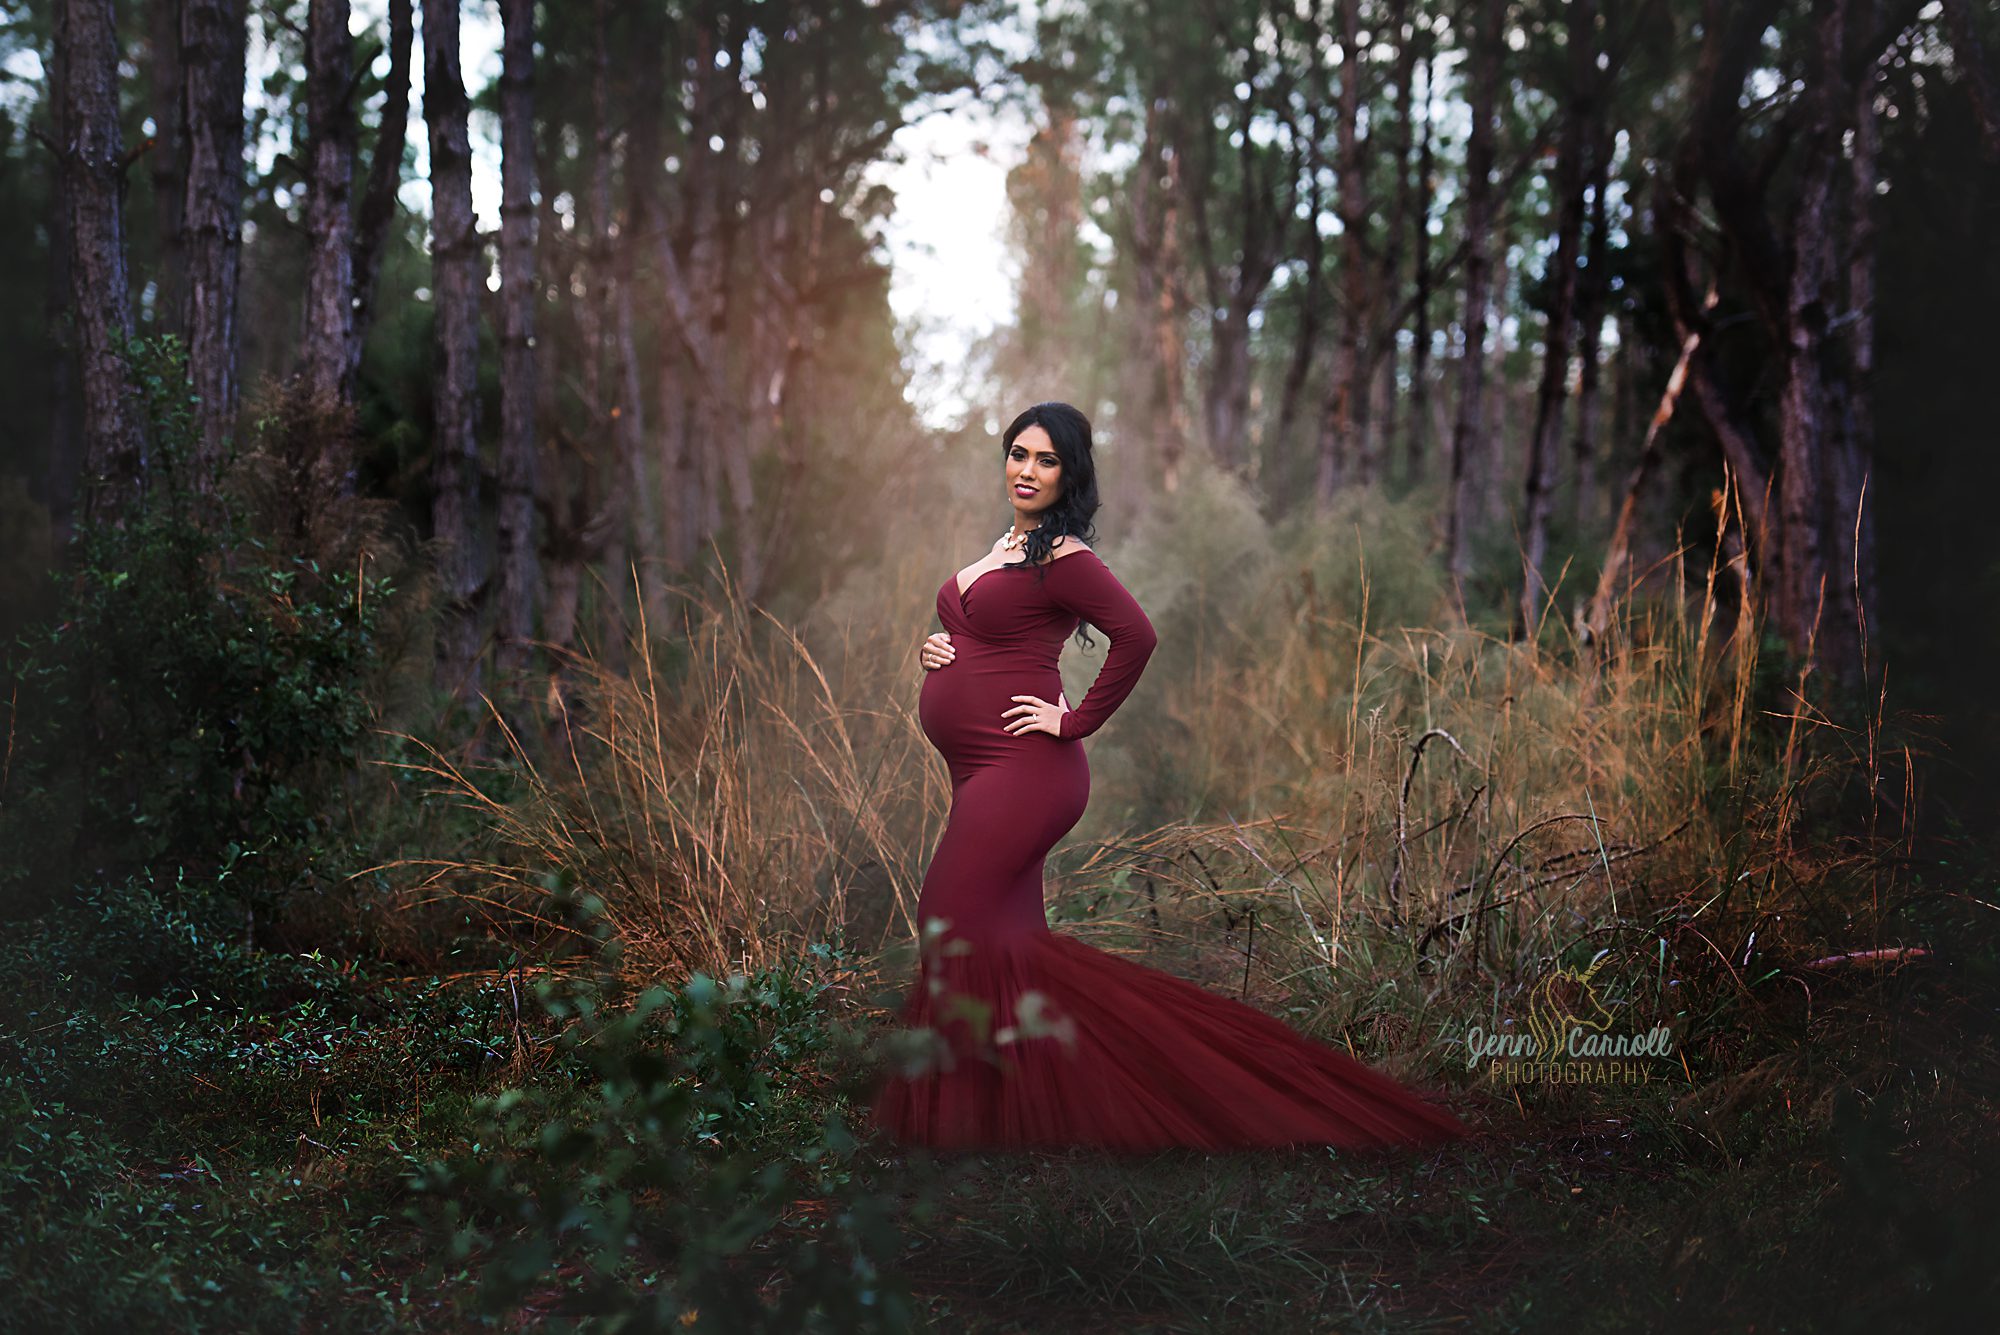 Jenn Carroll Photography, Jenn Carroll, New Tampa, Maternity Session, Maroon Gown, Sew Trendy Accessories, Maternity Gown, tulle, woods, glam, maternity, couples, dark and moody, sunflare, Florida, maternity photographer, maternity photography, tampa photographer, zephyrhills, wesley chapel, photographer, photography, zephyrhills photographer